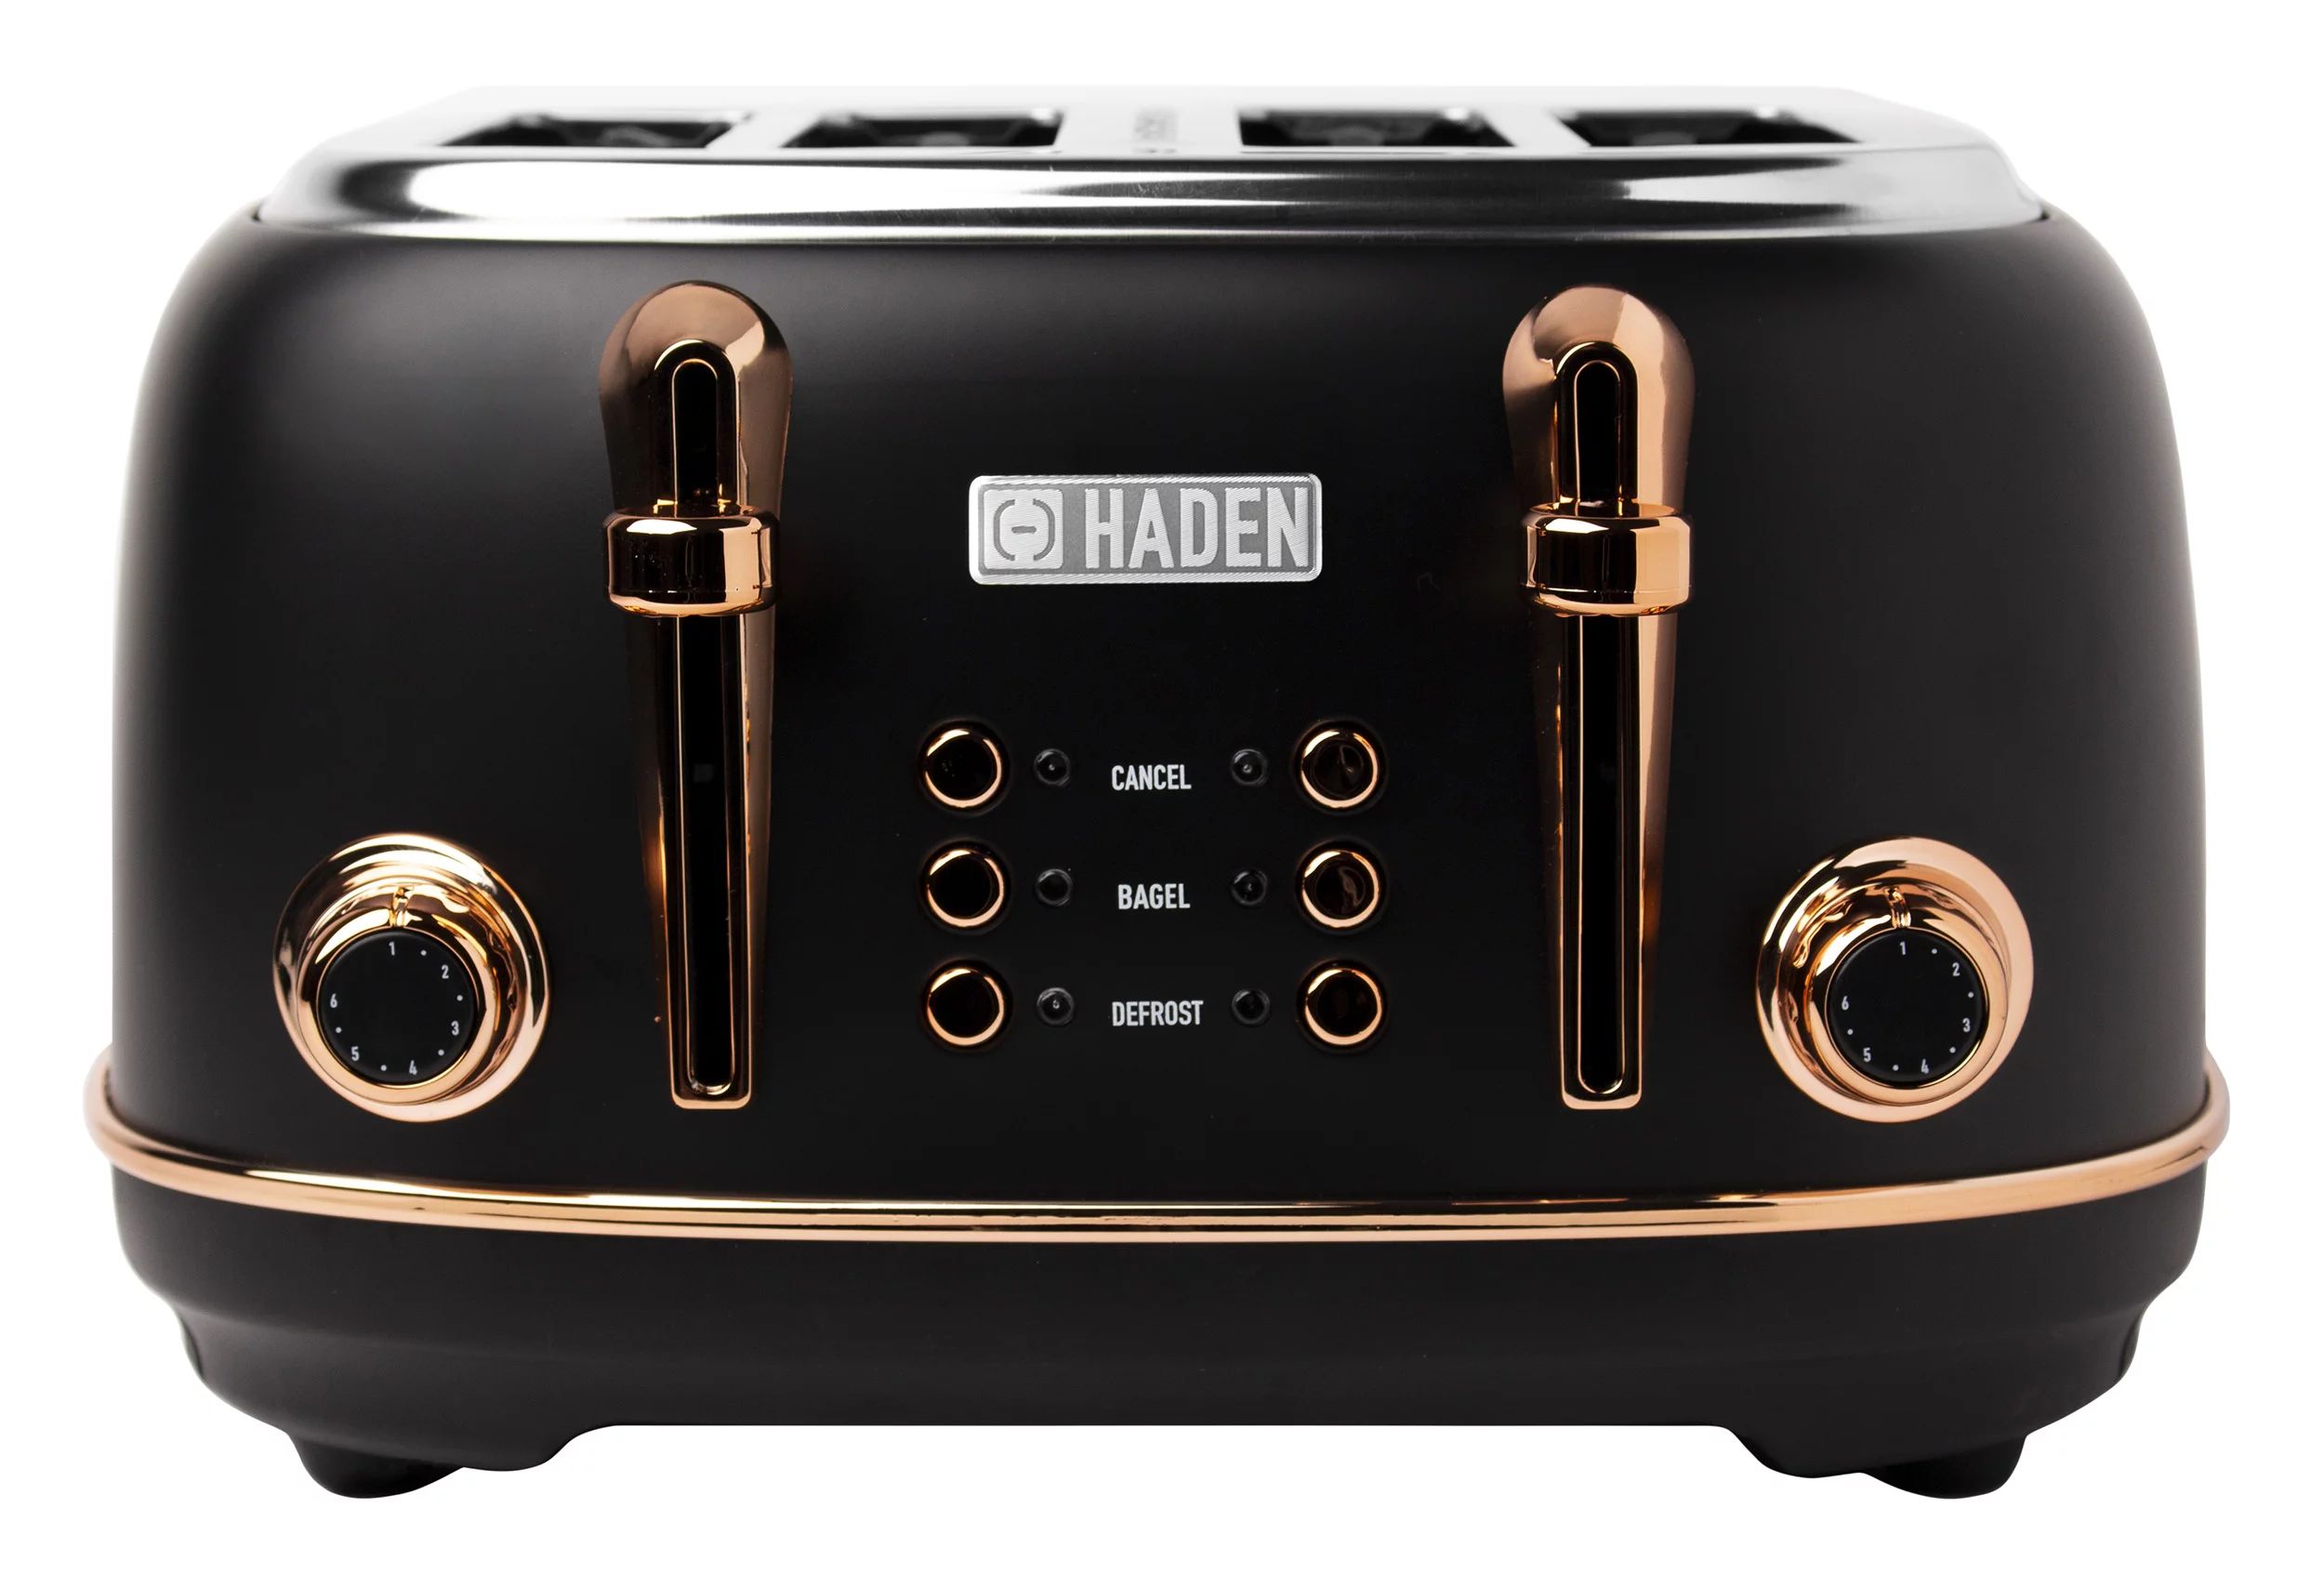 Haden Heritage 4-Slice Stainless Steel Toaster, Black and Copper | Walmart (US)